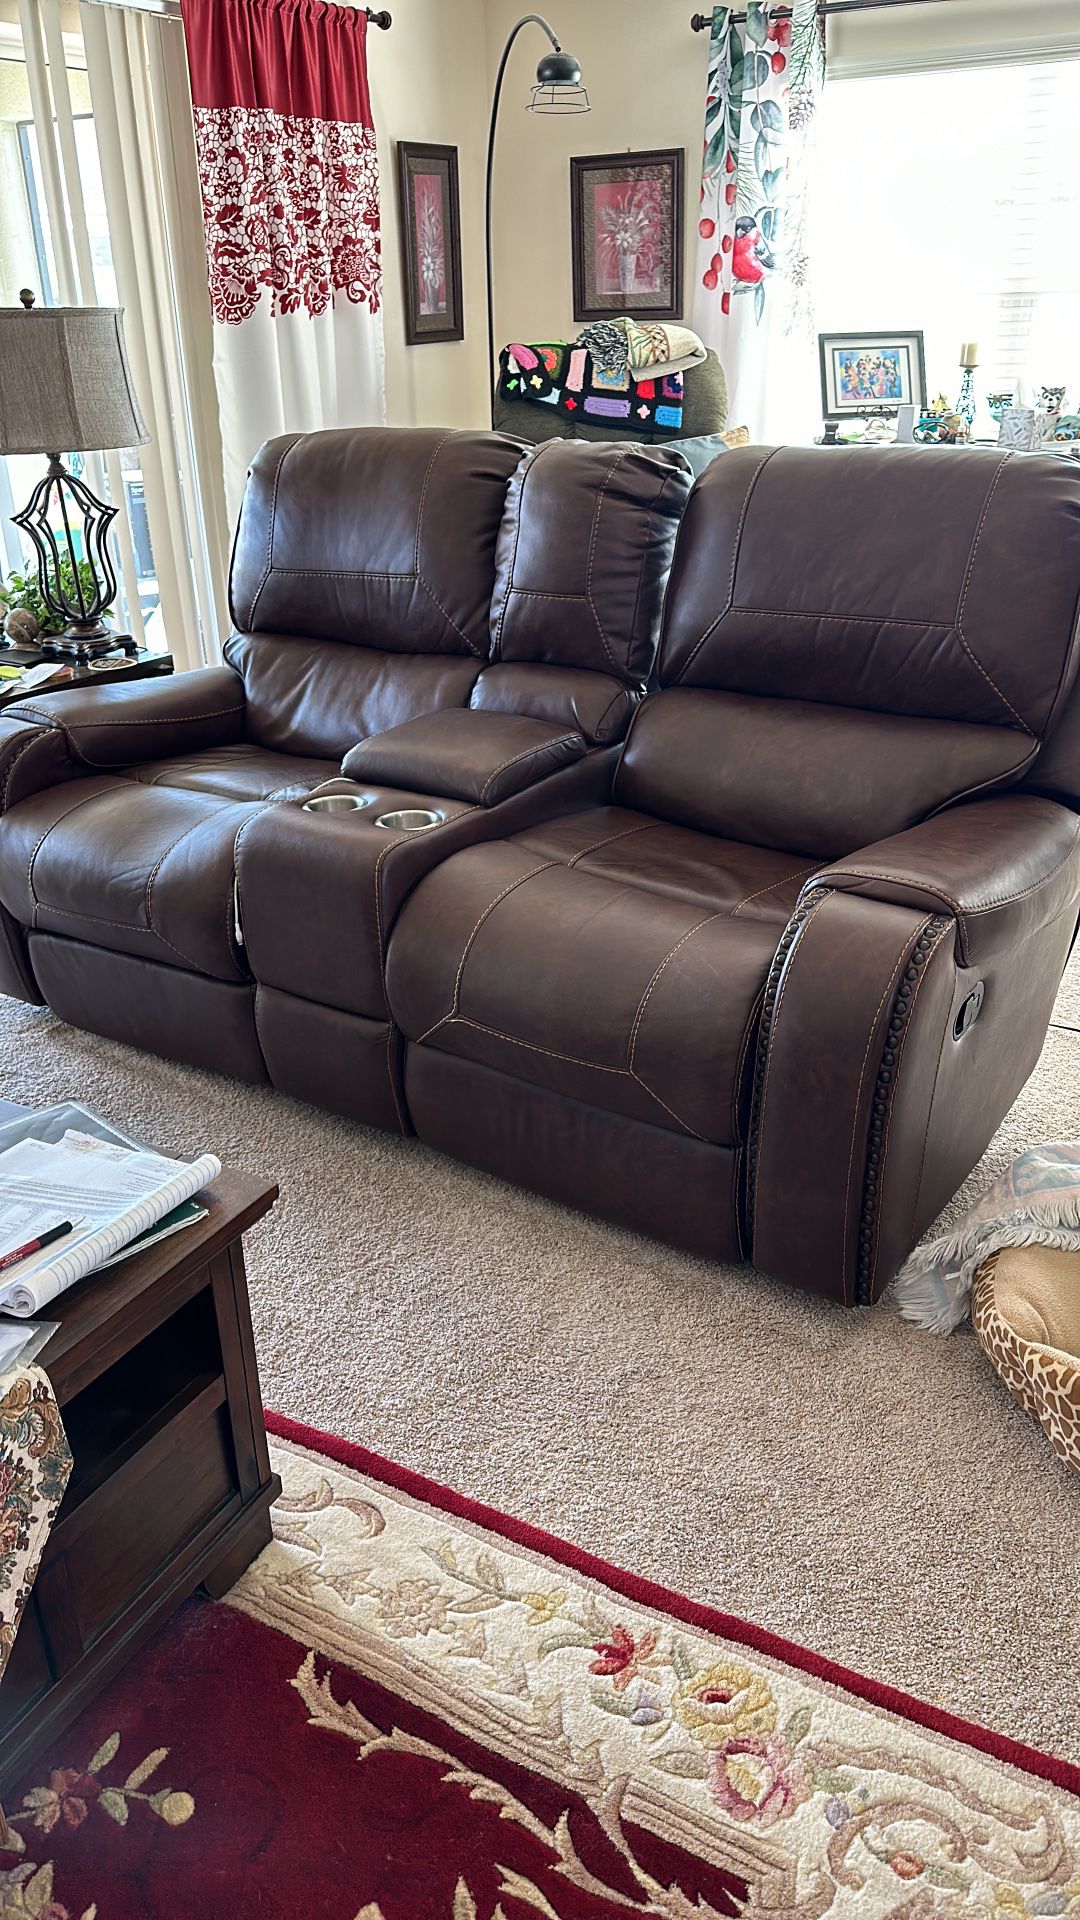 Recliner Movie Sofa And Chair That Also Swivel, Rocker, Recliner